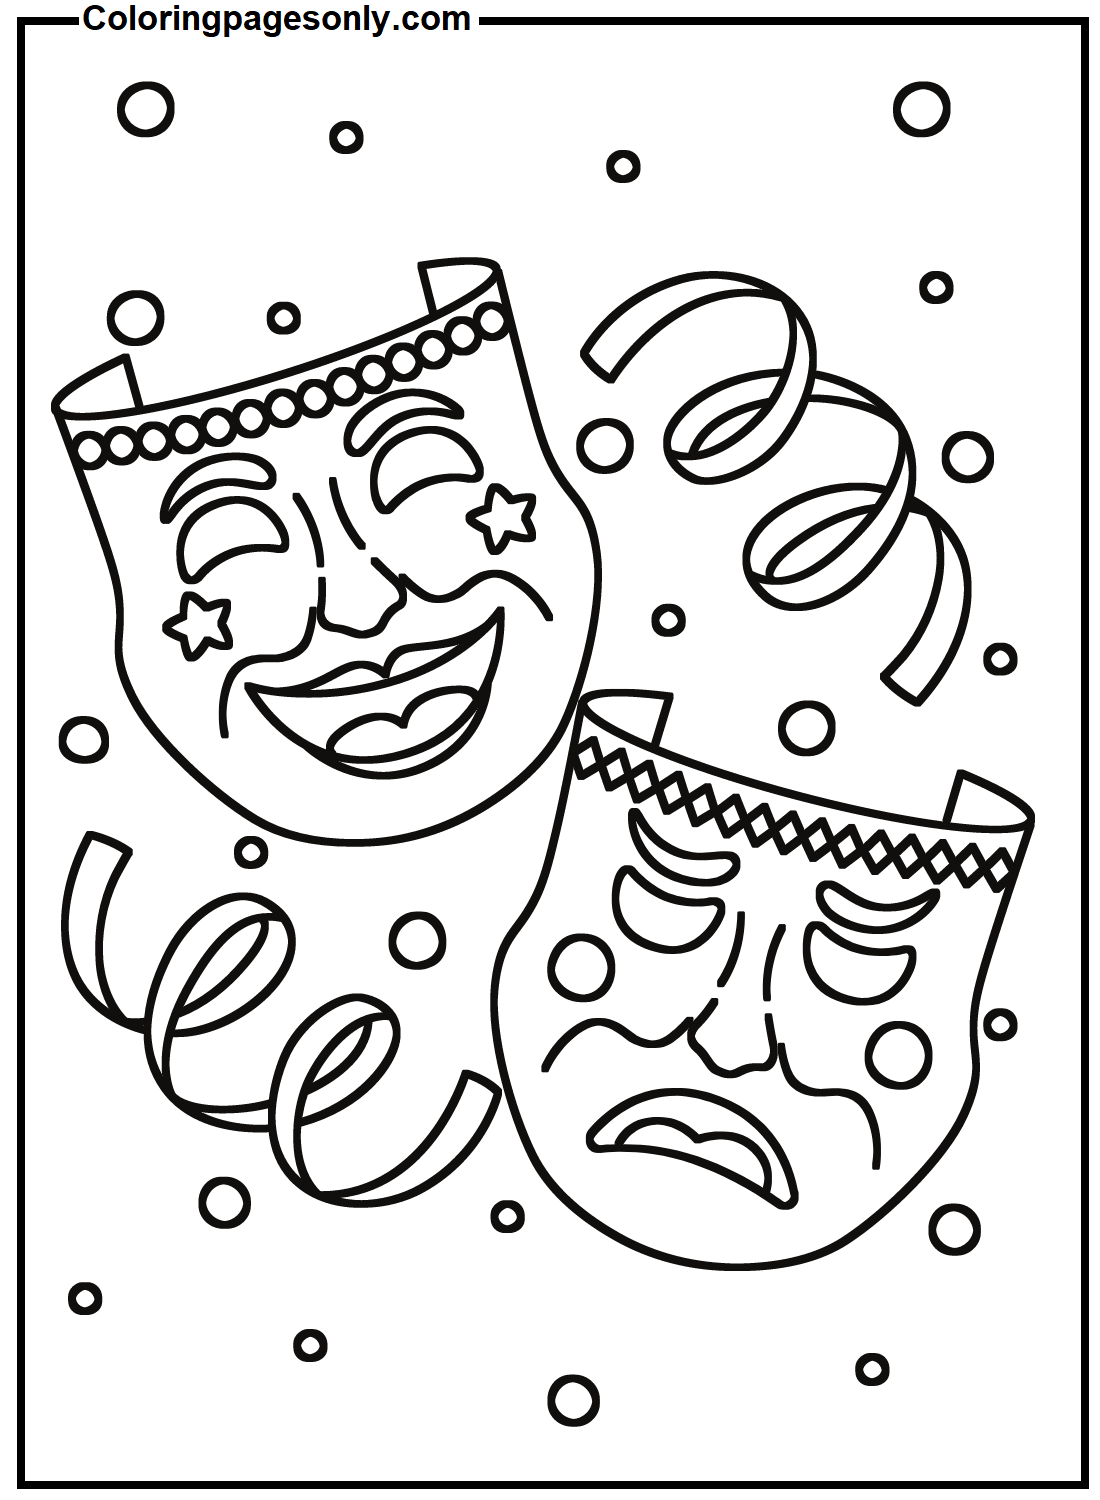 Mardi Gras Mask Image Coloring Pages